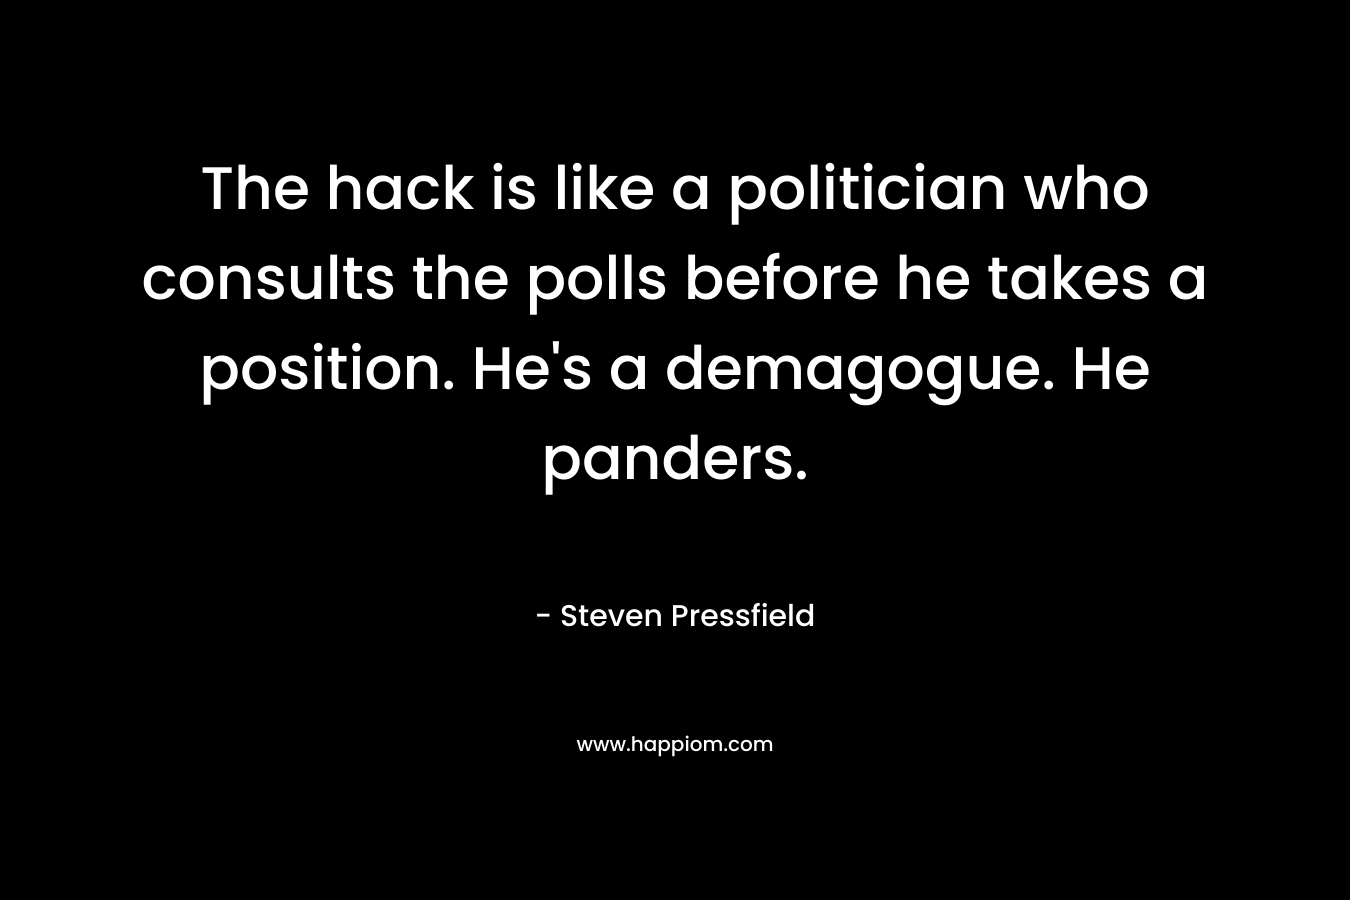 The hack is like a politician who consults the polls before he takes a position. He's a demagogue. He panders.